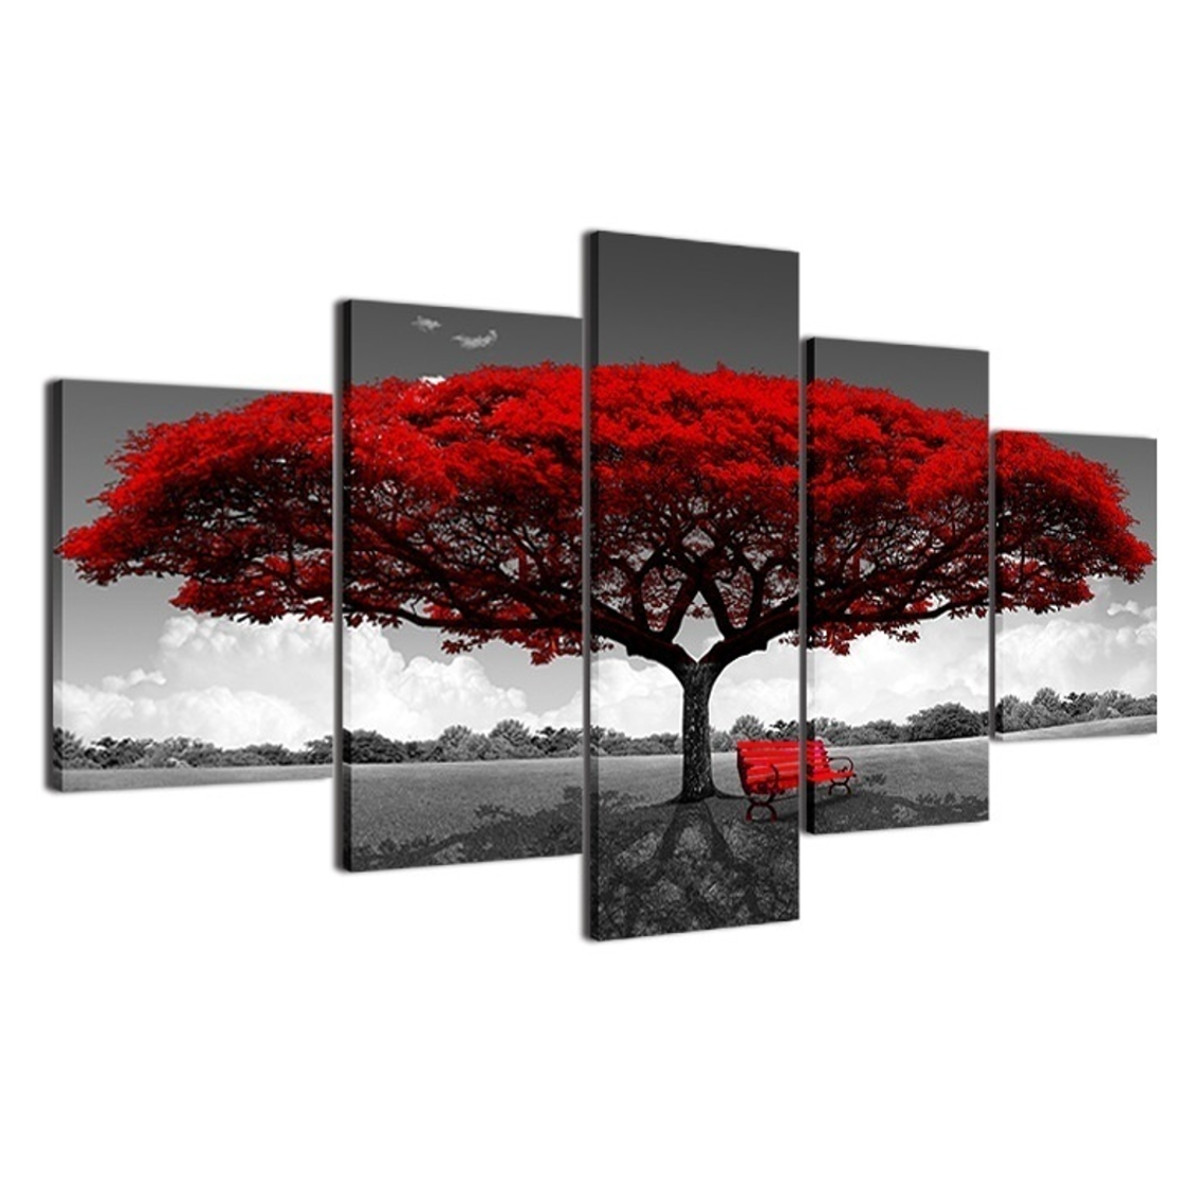 5Pcs-Red-Tree-Canvas-Paintings-Wall-Decorative-Print-Art-Pictures-Unframed-Wall-Hanging-Home-Office--1774551-3